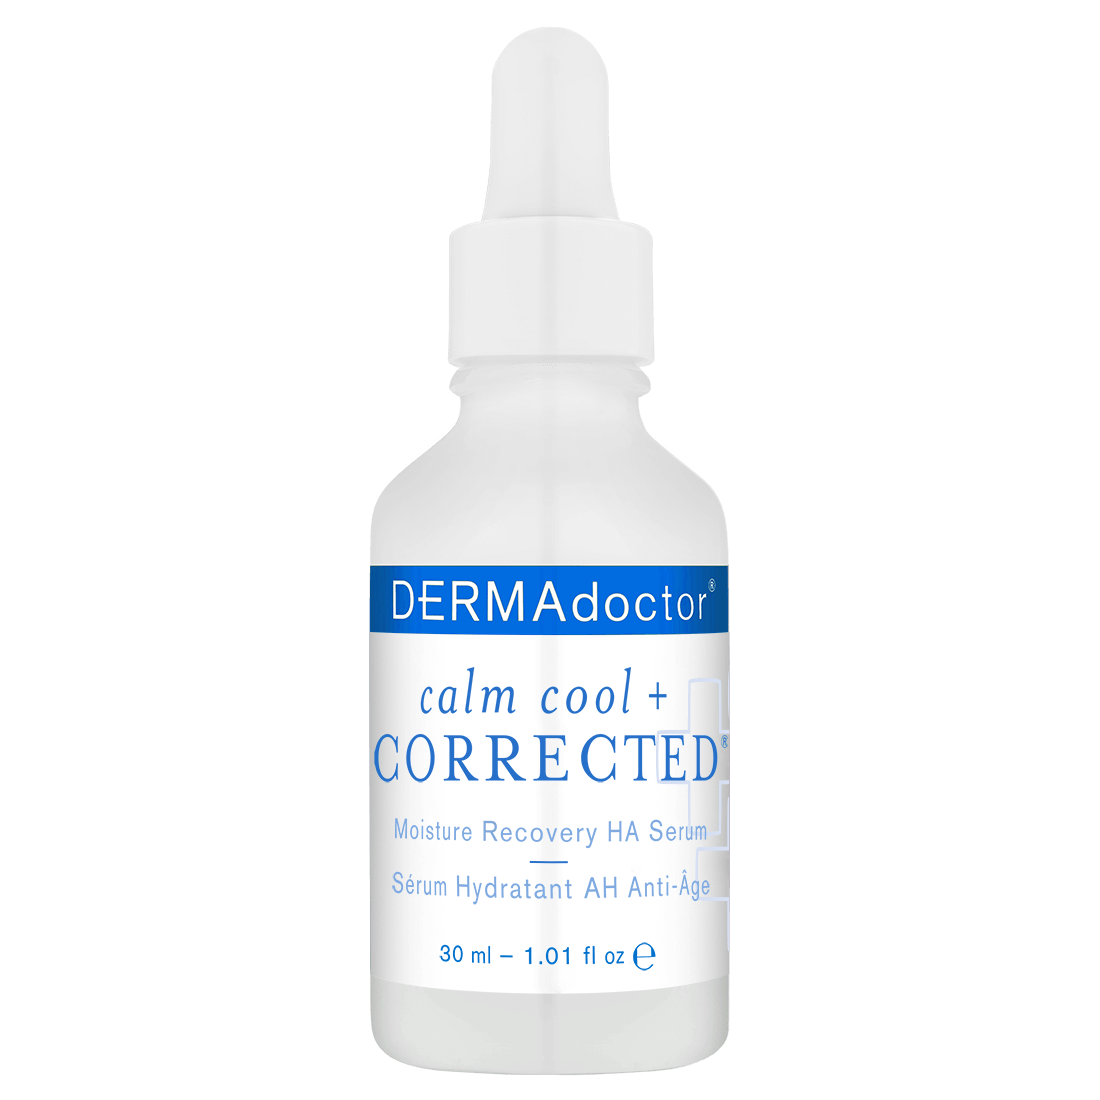 Calm Cool + Corrected Moisture Recovery Hyaluronic Acid Serum